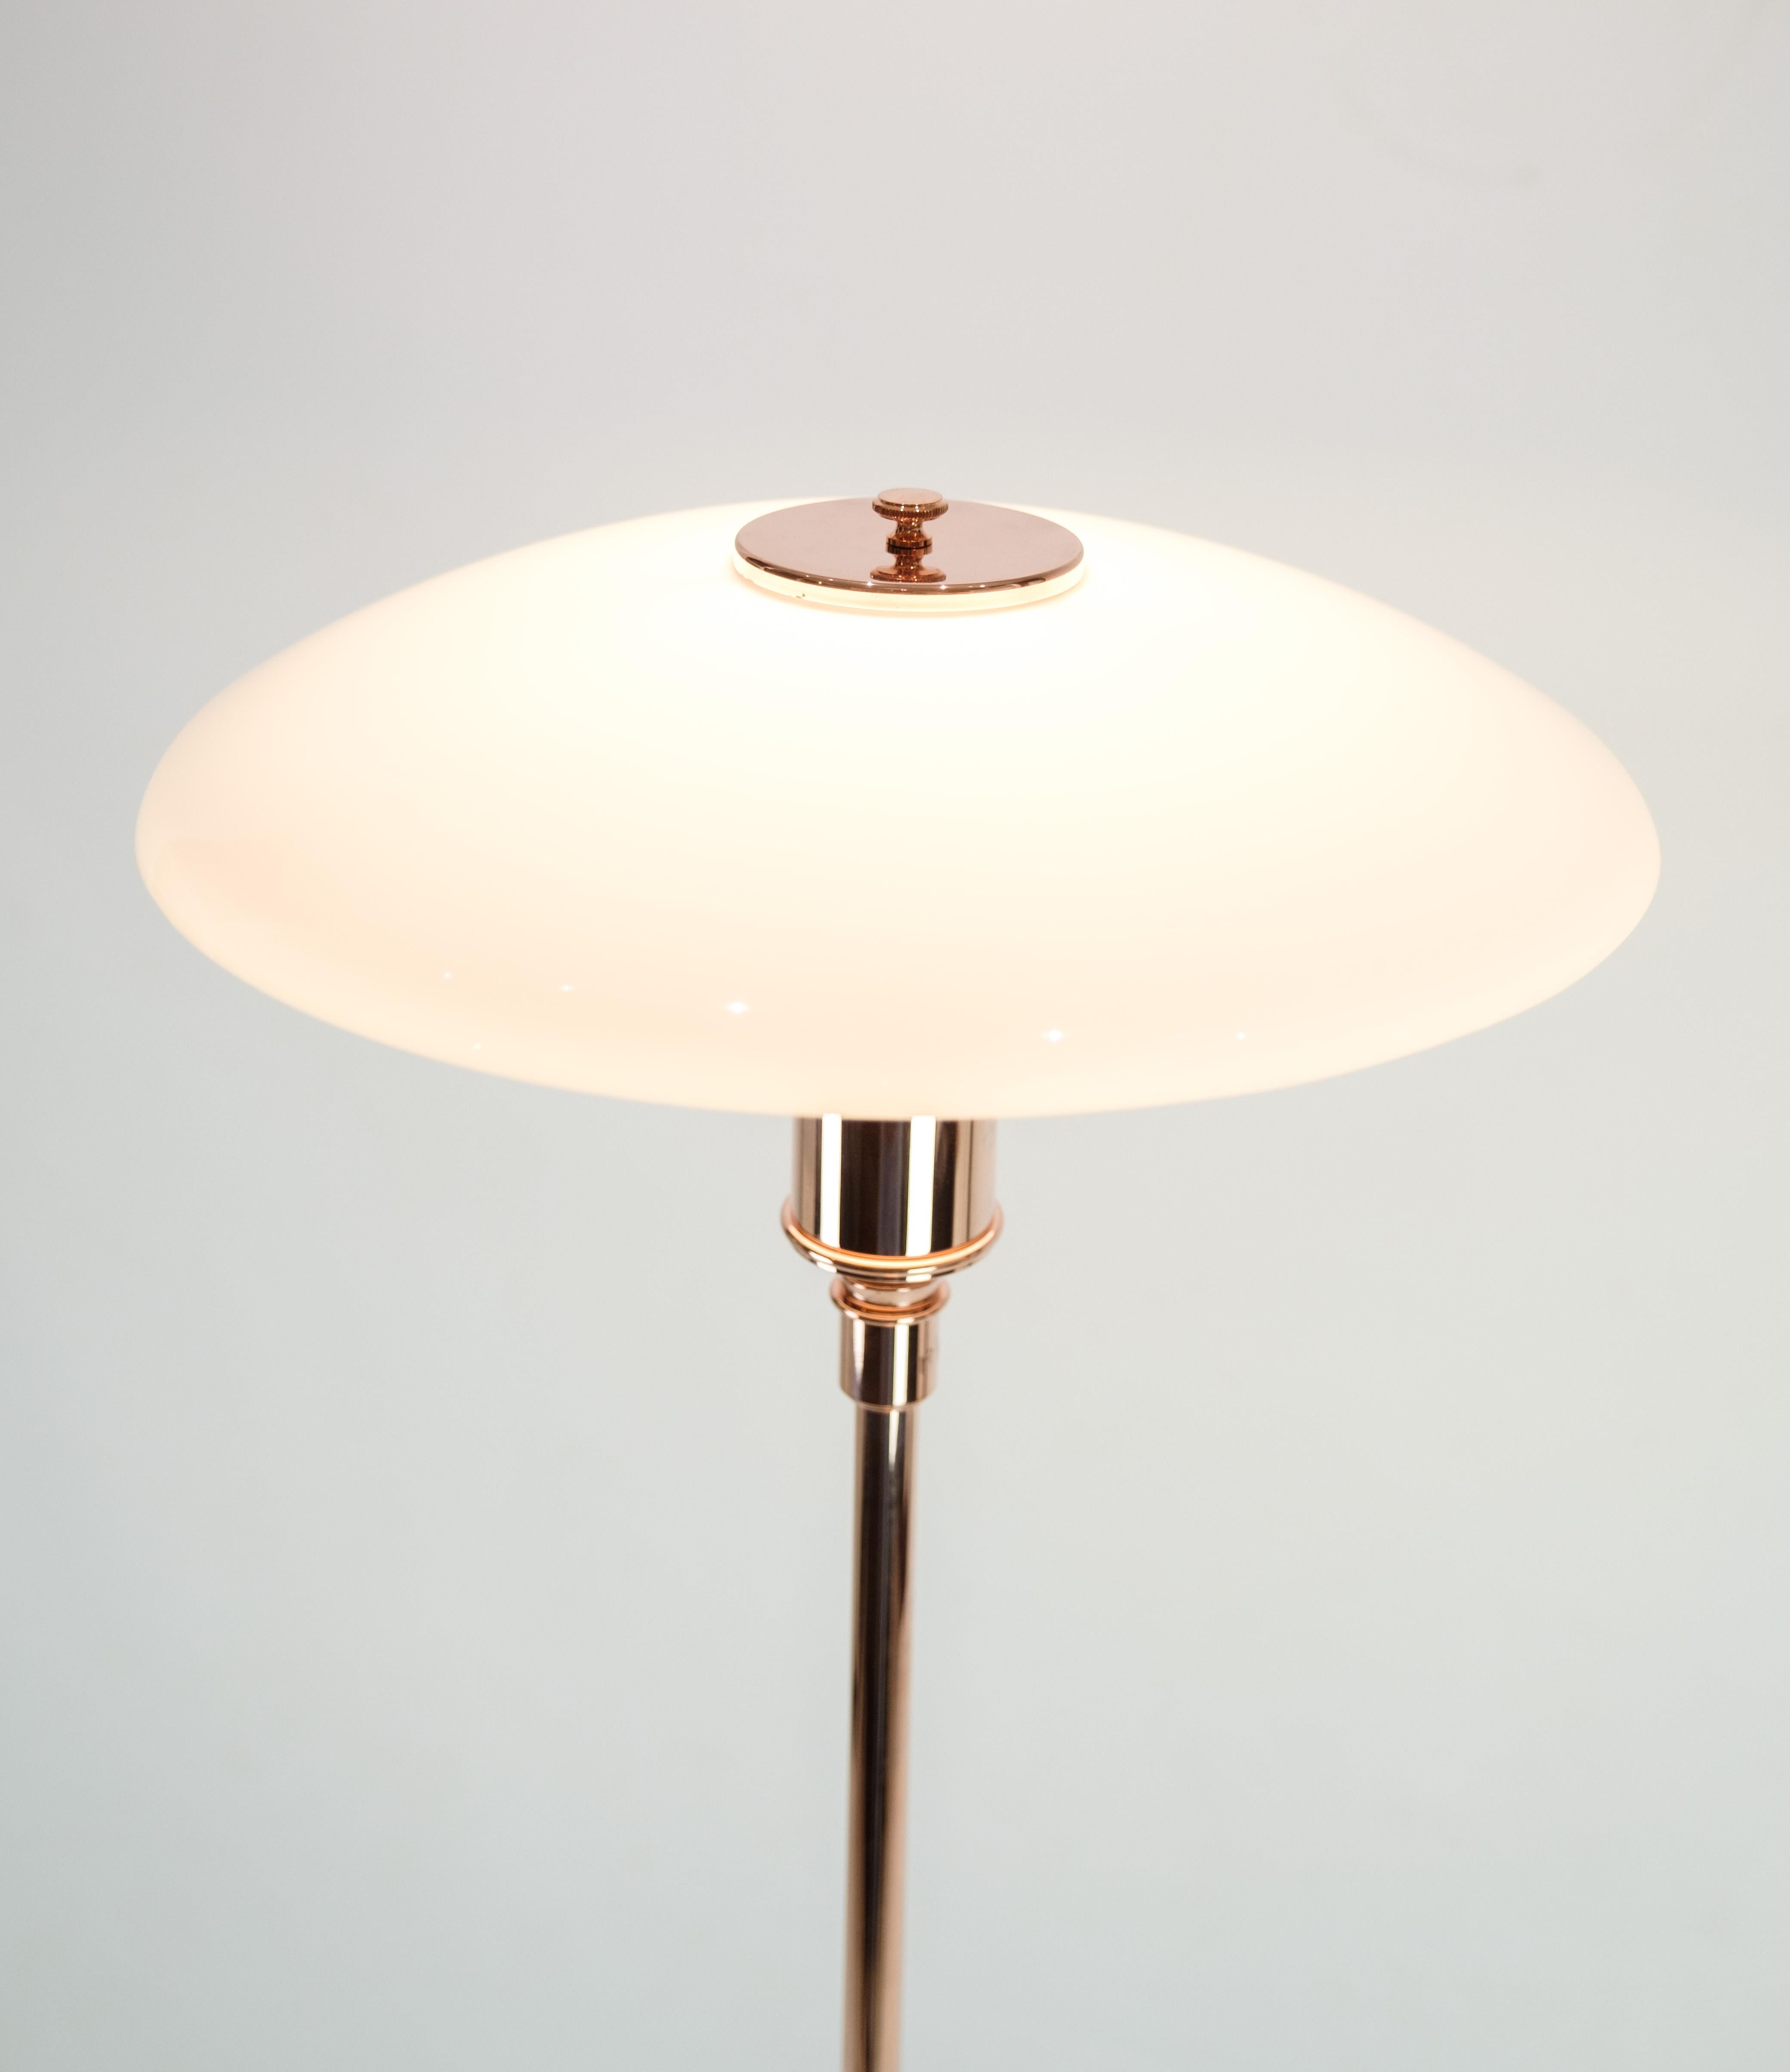 PH Floor Lamp, Model Ph3½-2½, Limited Edition, Poul Henningsen, Louis Poulsen In Excellent Condition For Sale In Lejre, DK